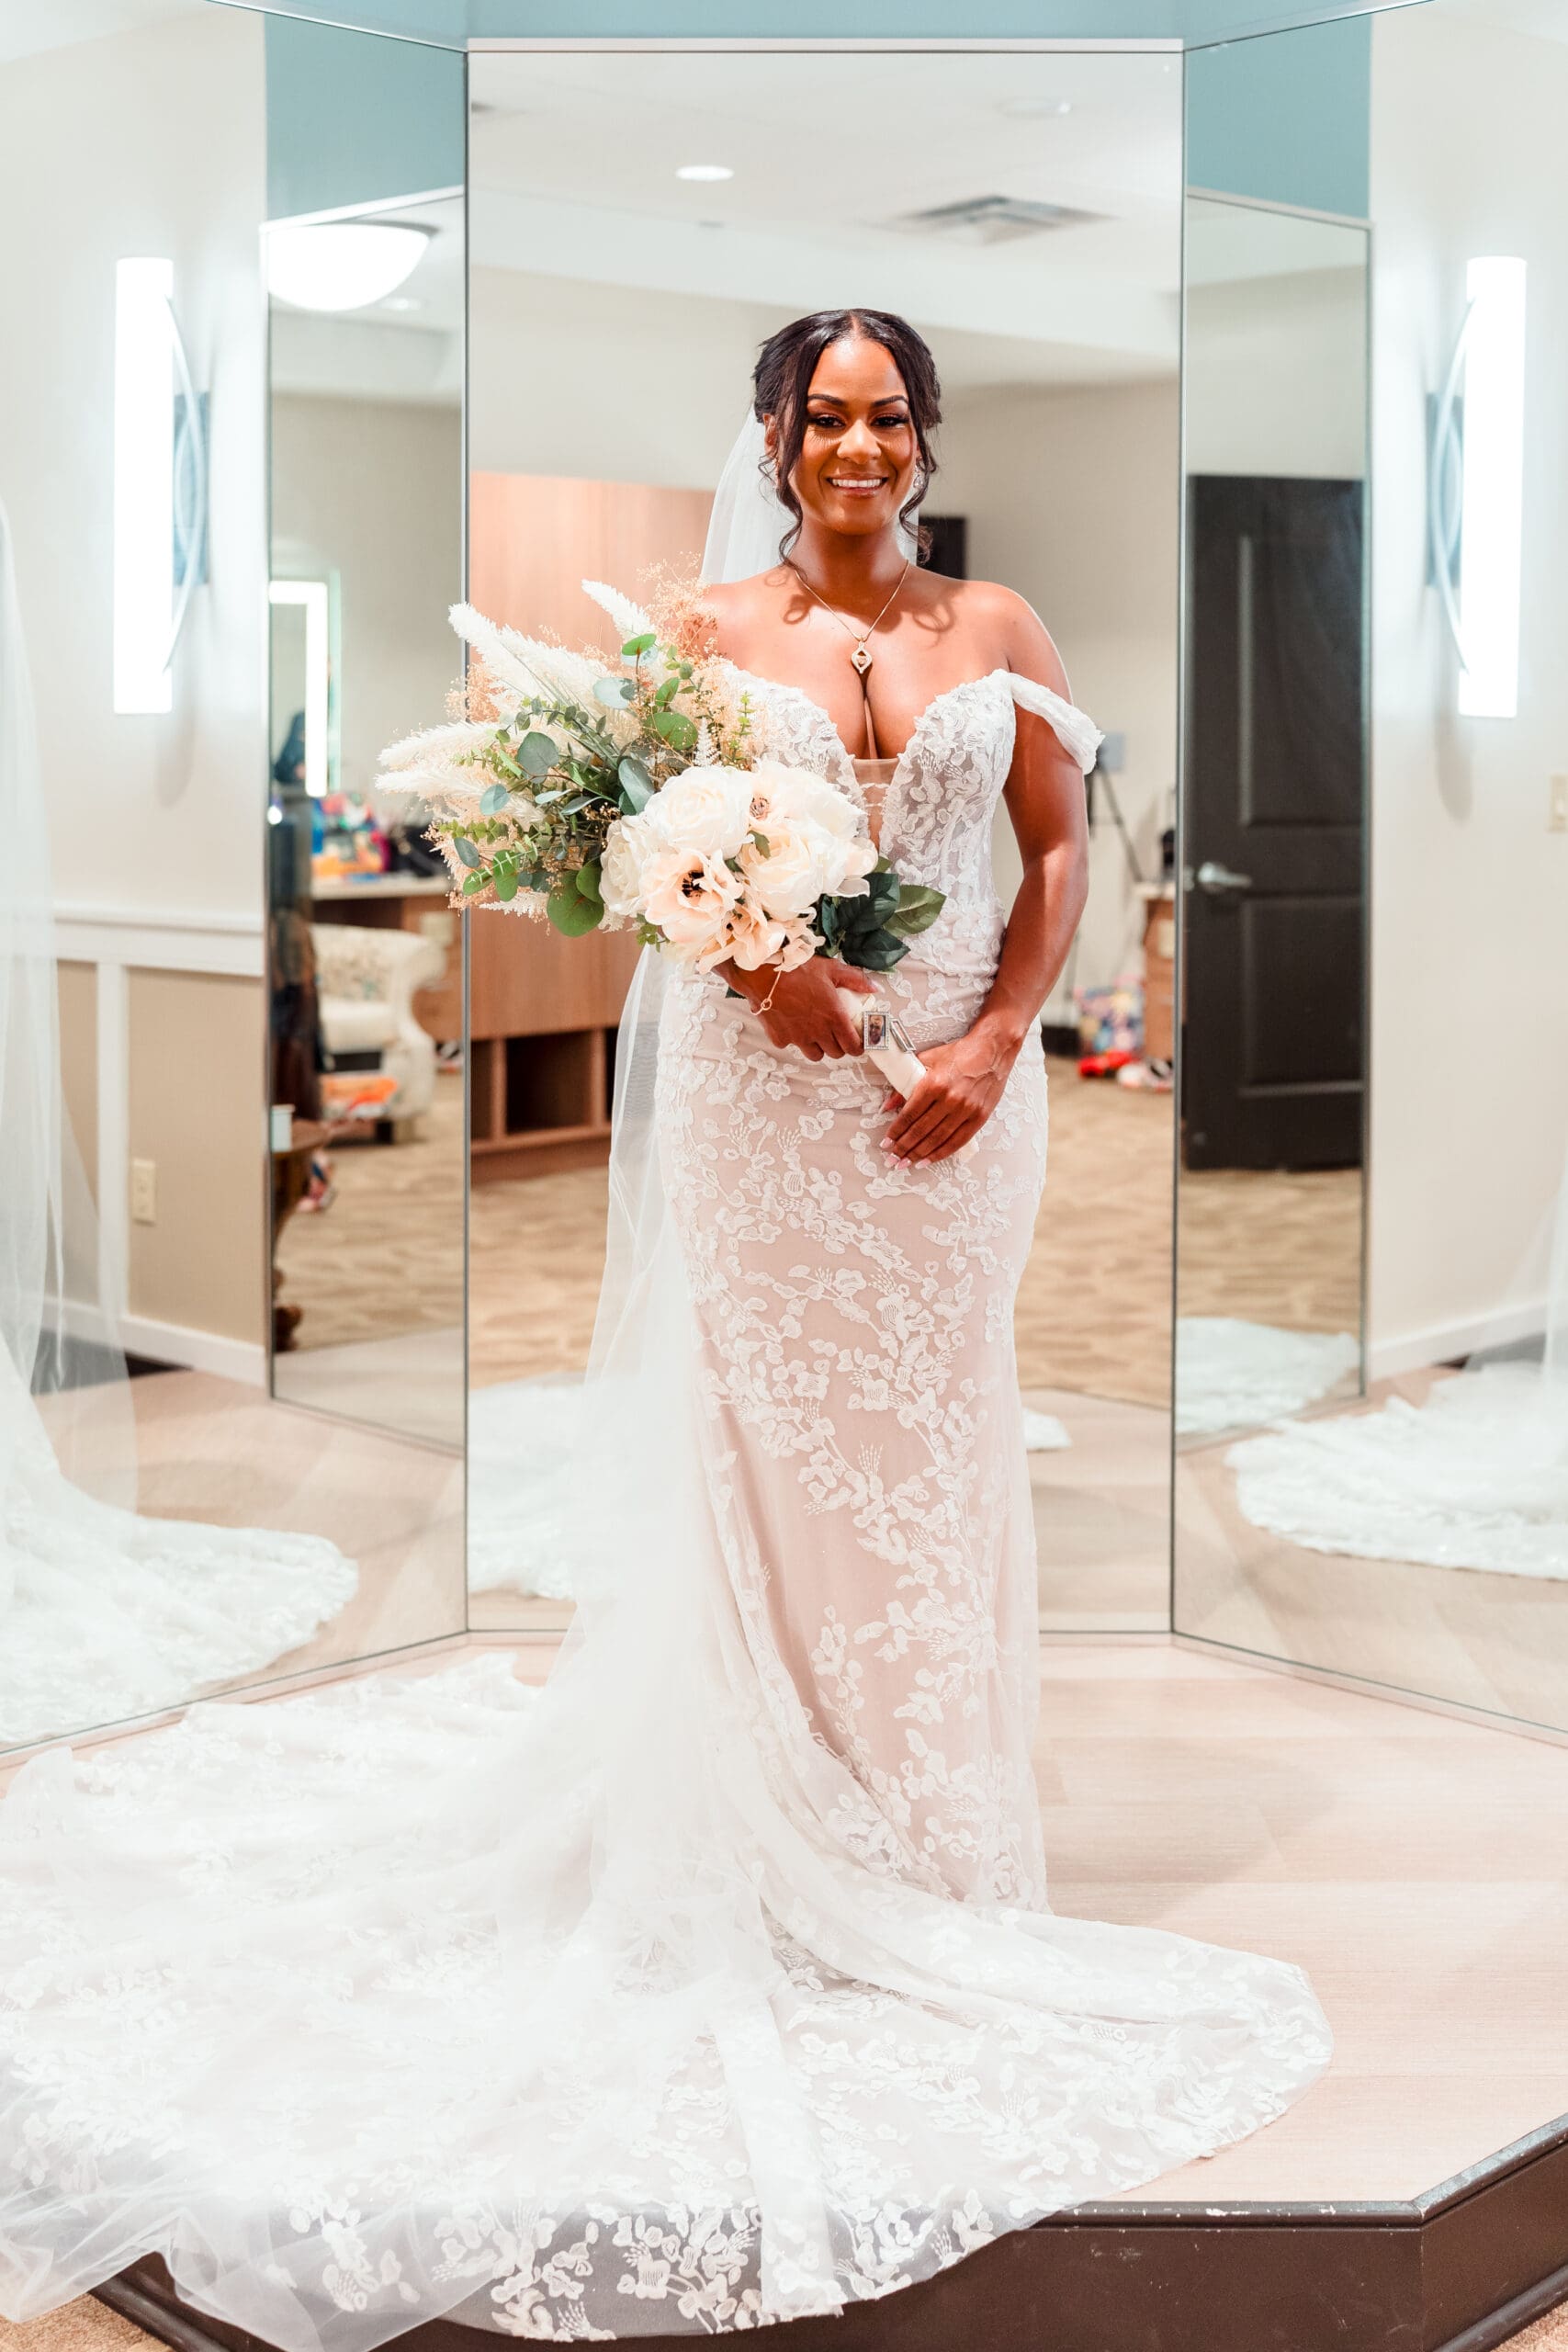 Lateisha in her wedding dress, holding her bouquet of flowers, showcasing her finished bridal look after hair and makeup.